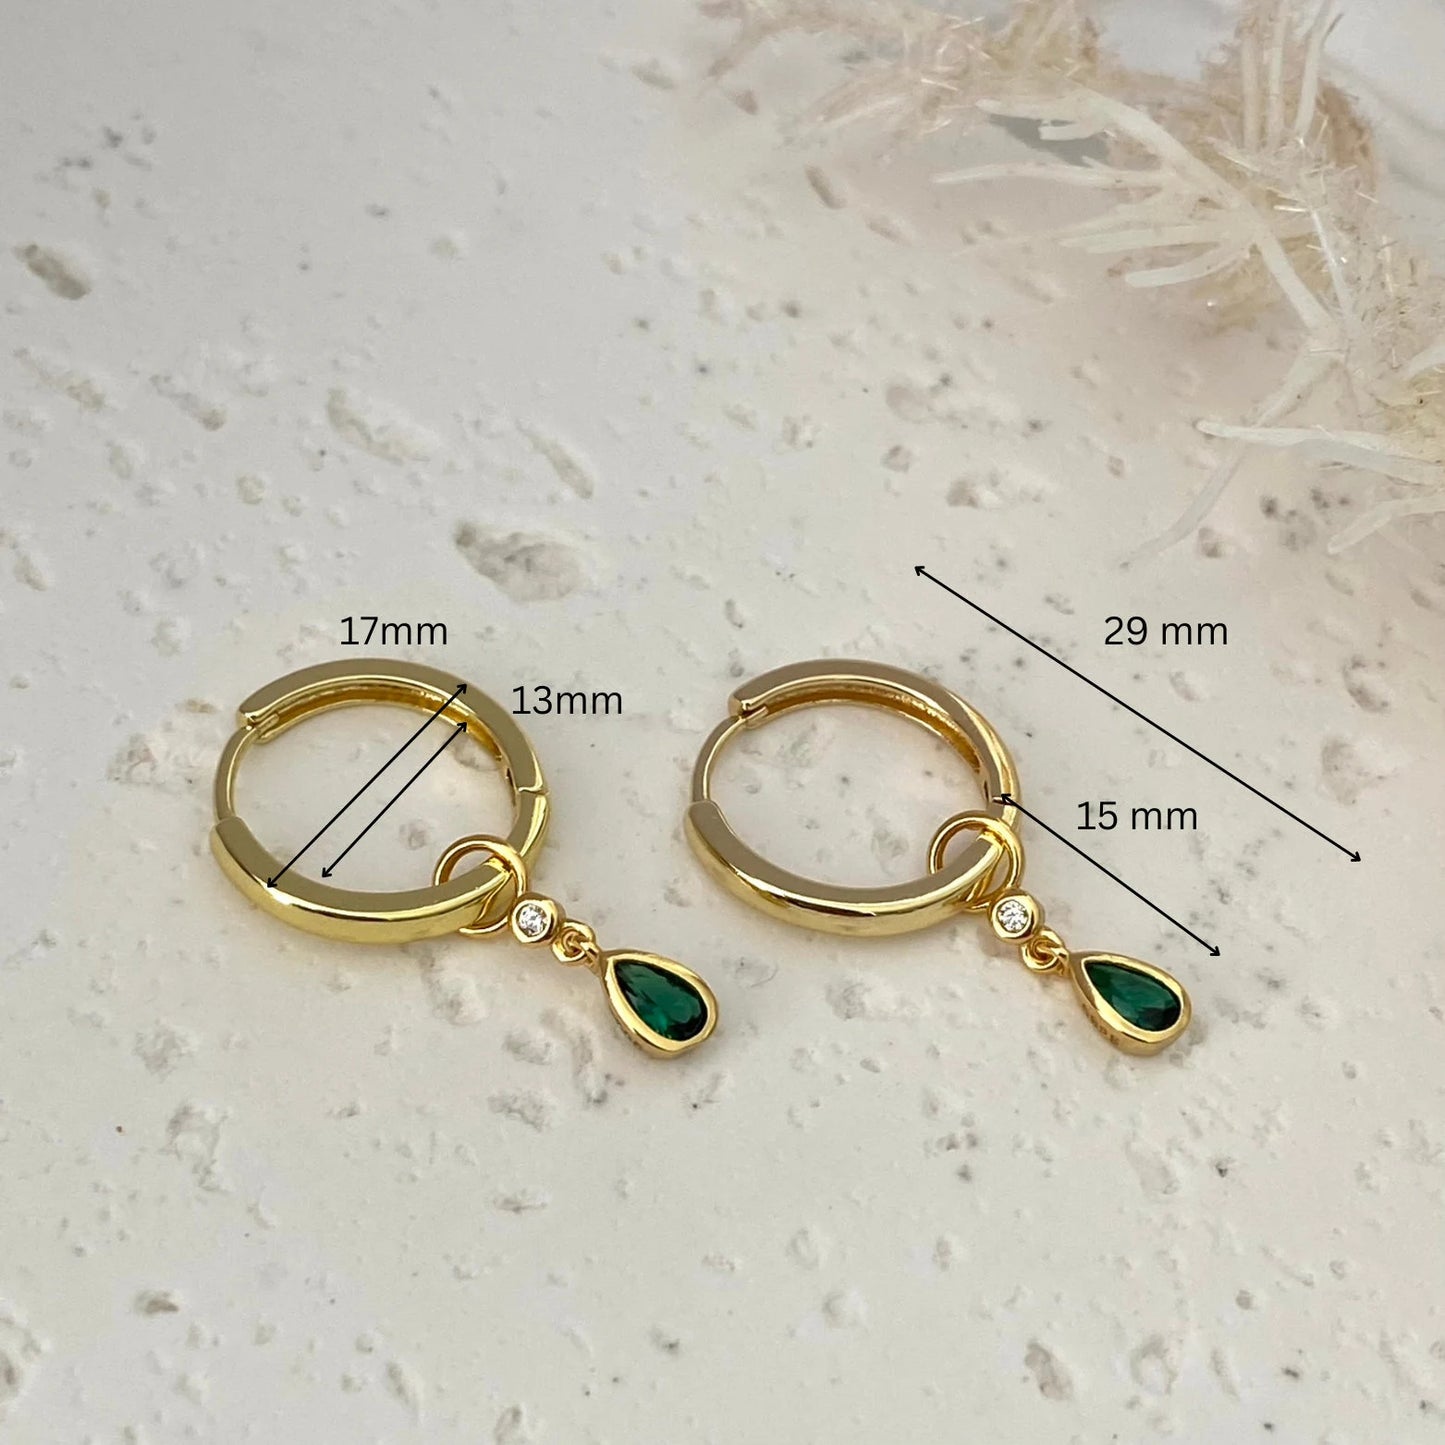 Green earrings with 925 Sterling Silver, Emerald Green charm